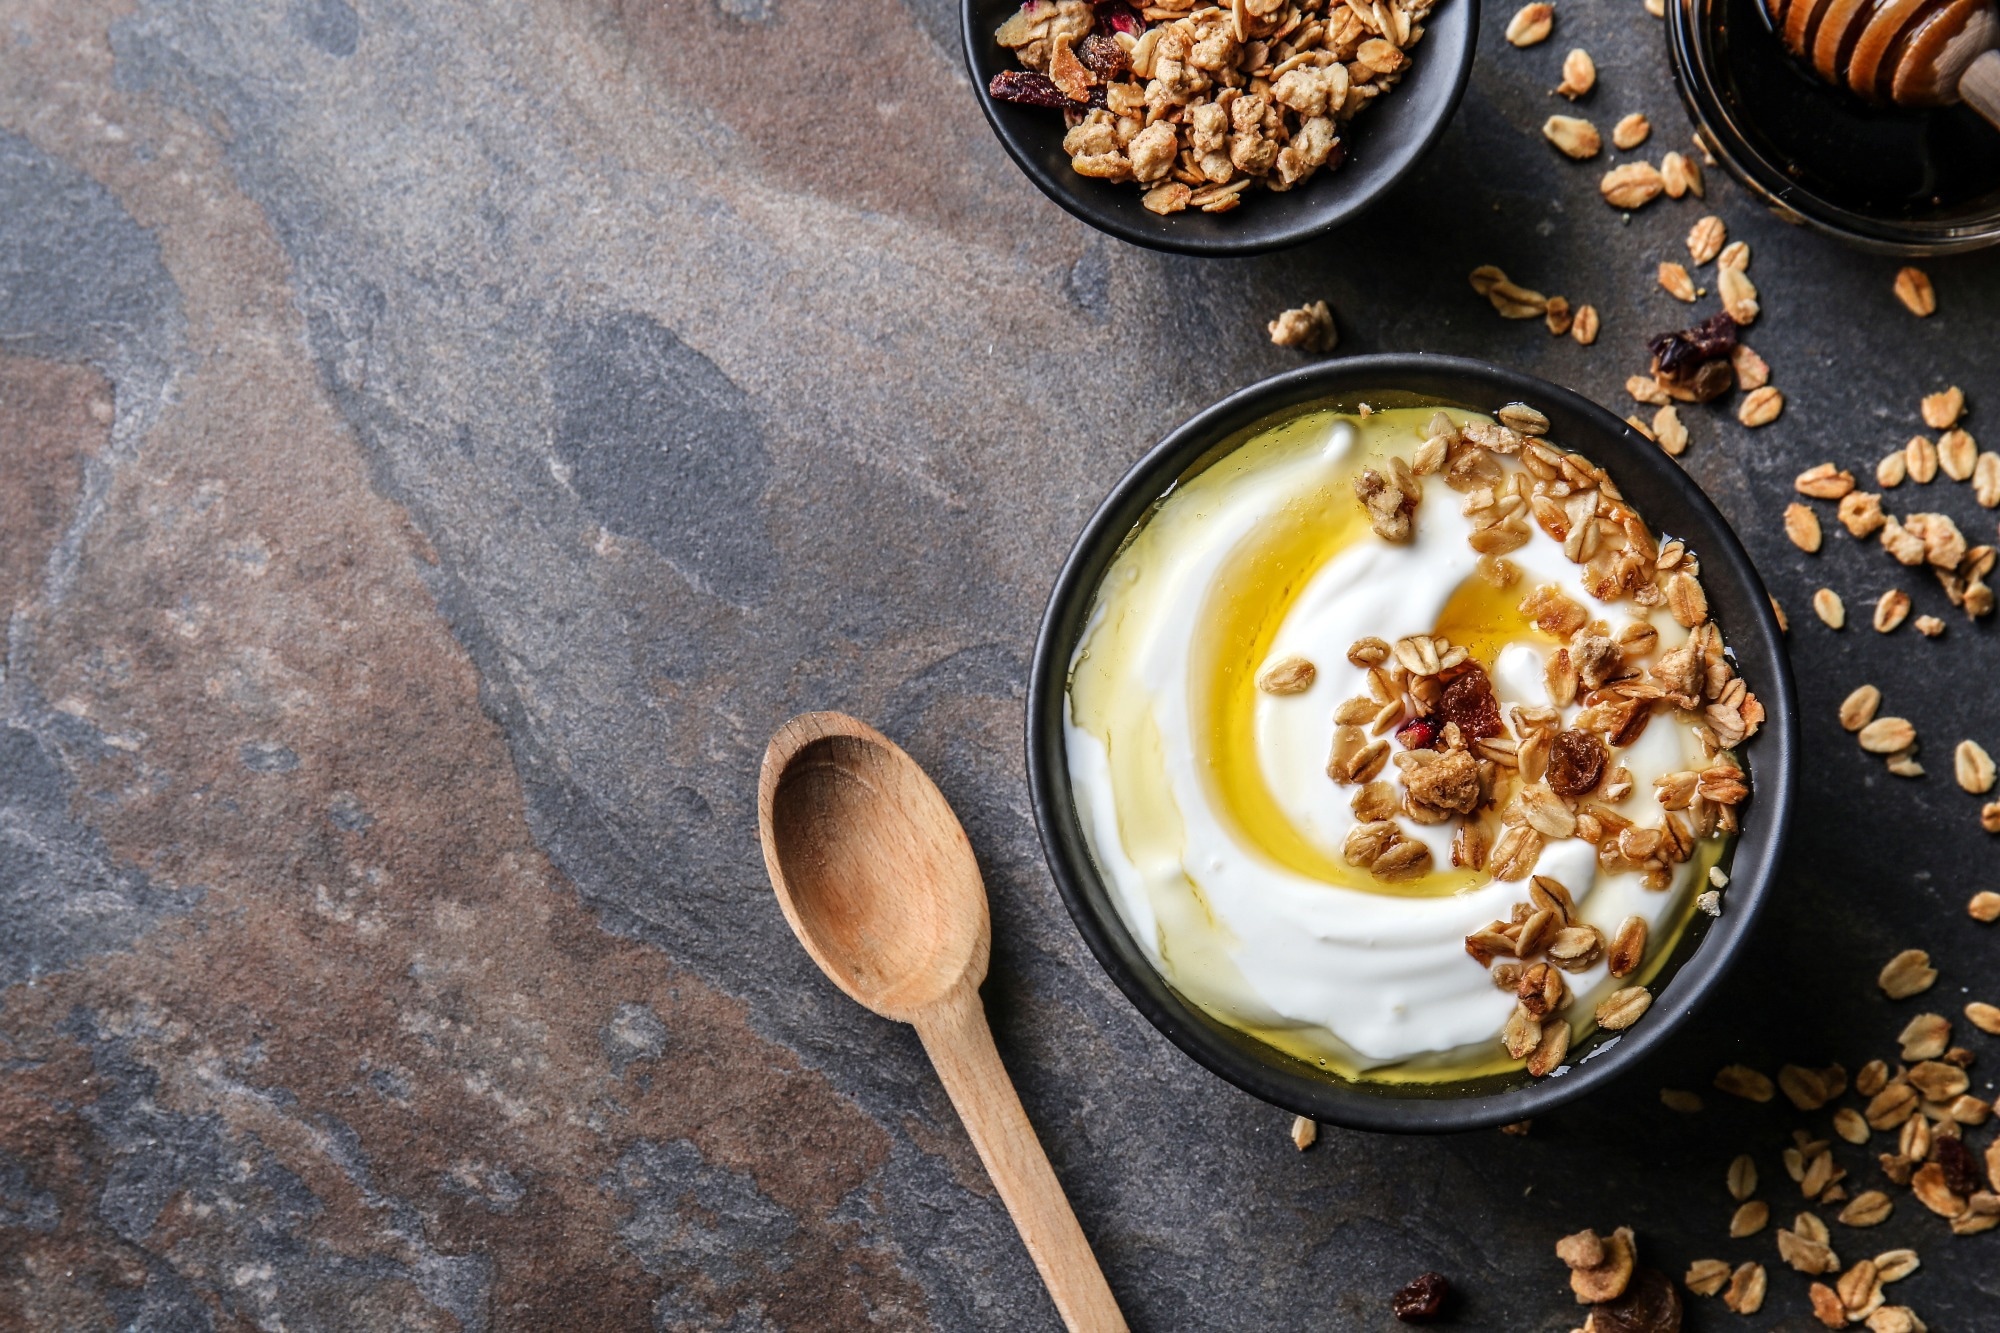 The role of yogurt in diabetes and obesity prevention